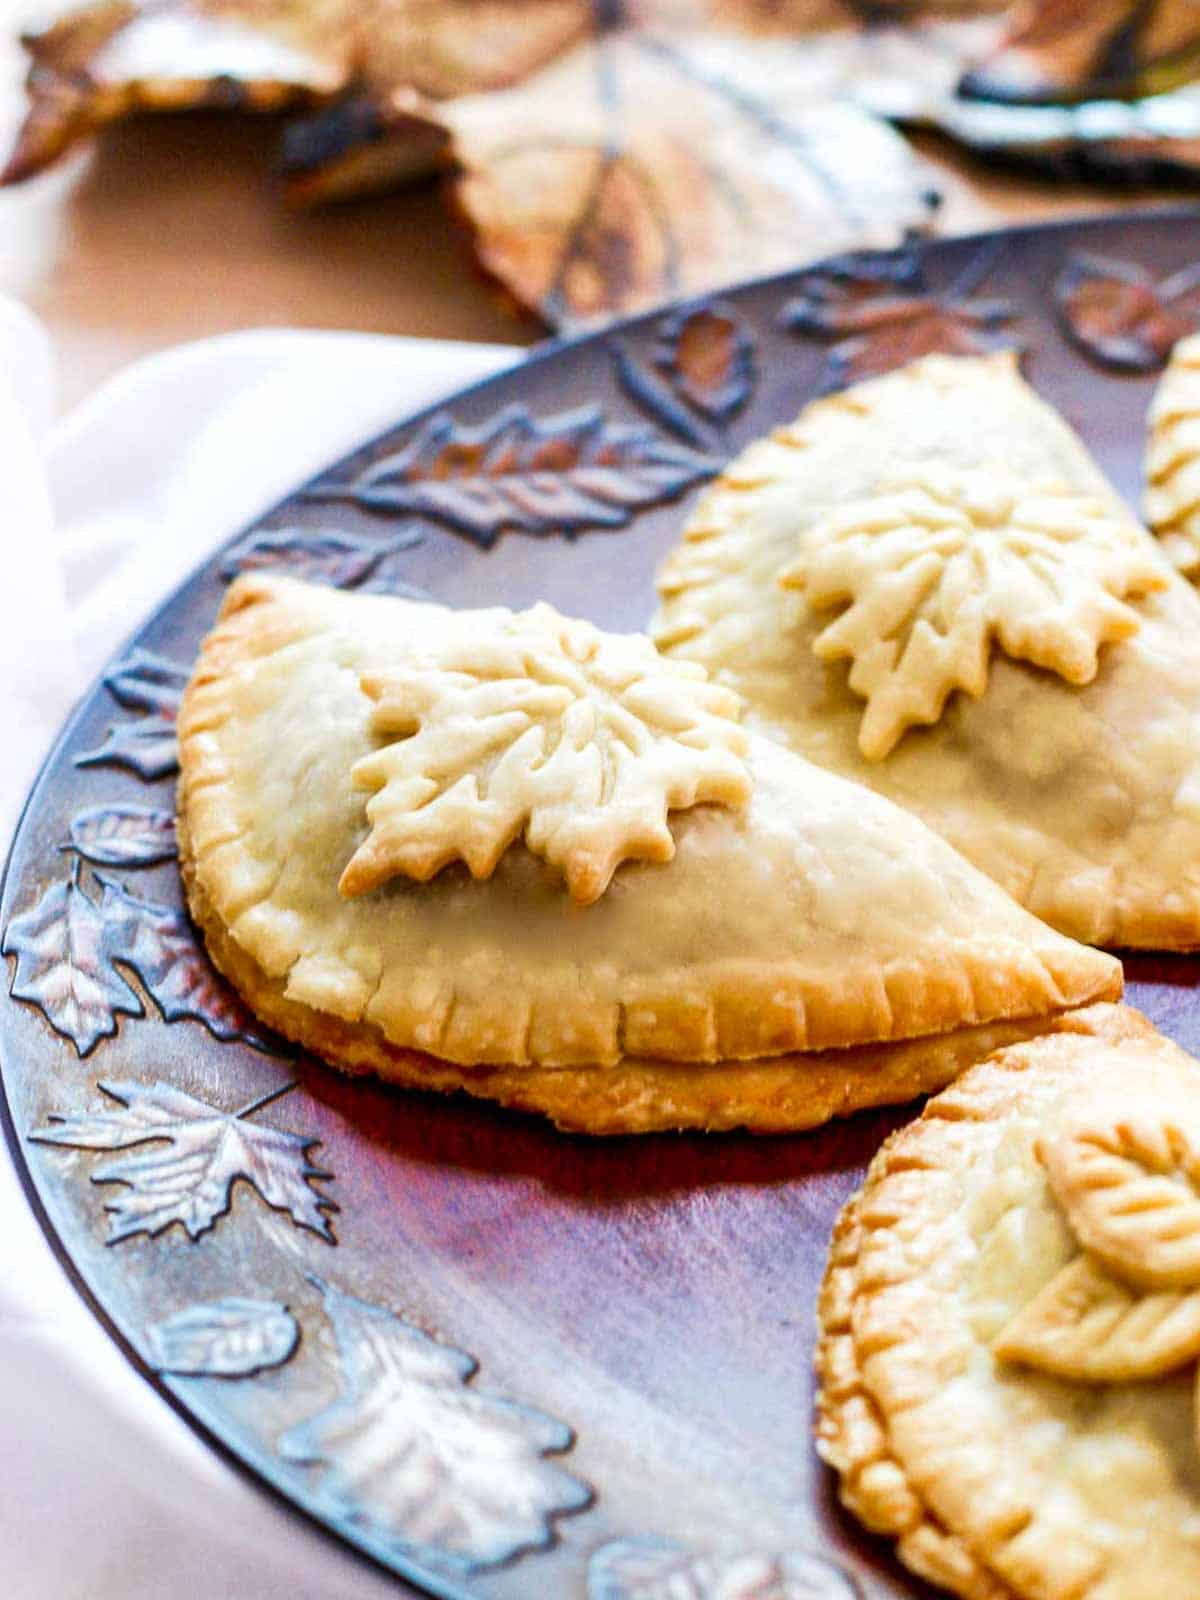 Golden brown baked empanadas decorated with pie crust leaves on a Fall tray.